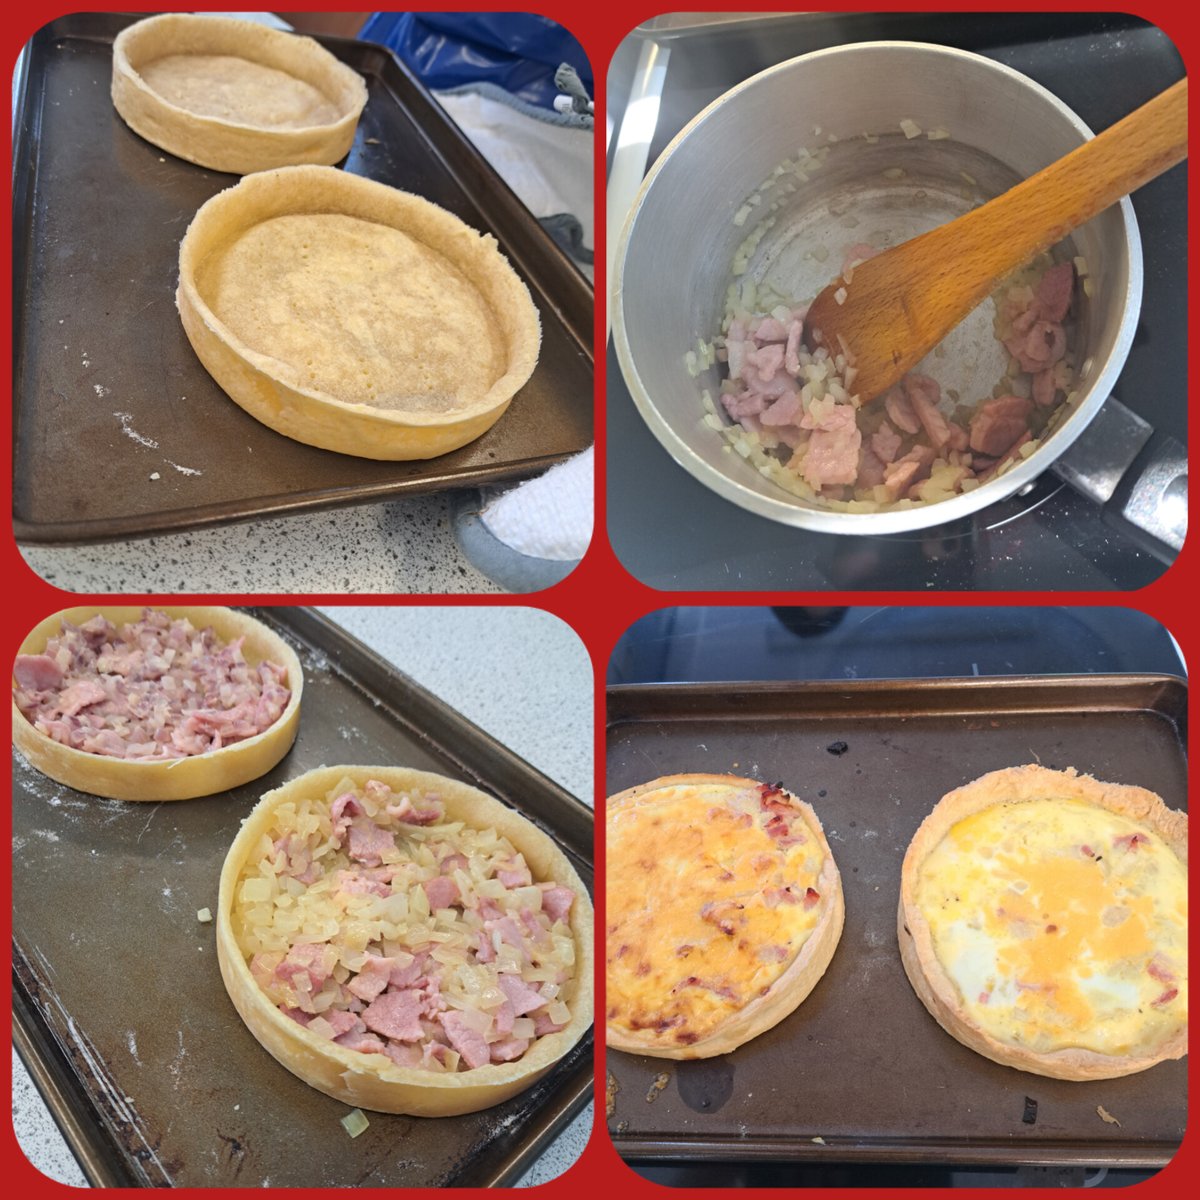 N5 Practical Cookery practicing pastry skills with a delicious quiche Lorraine. Nice work following the pastry rules, even in this heatwave!👍🏻#pastry